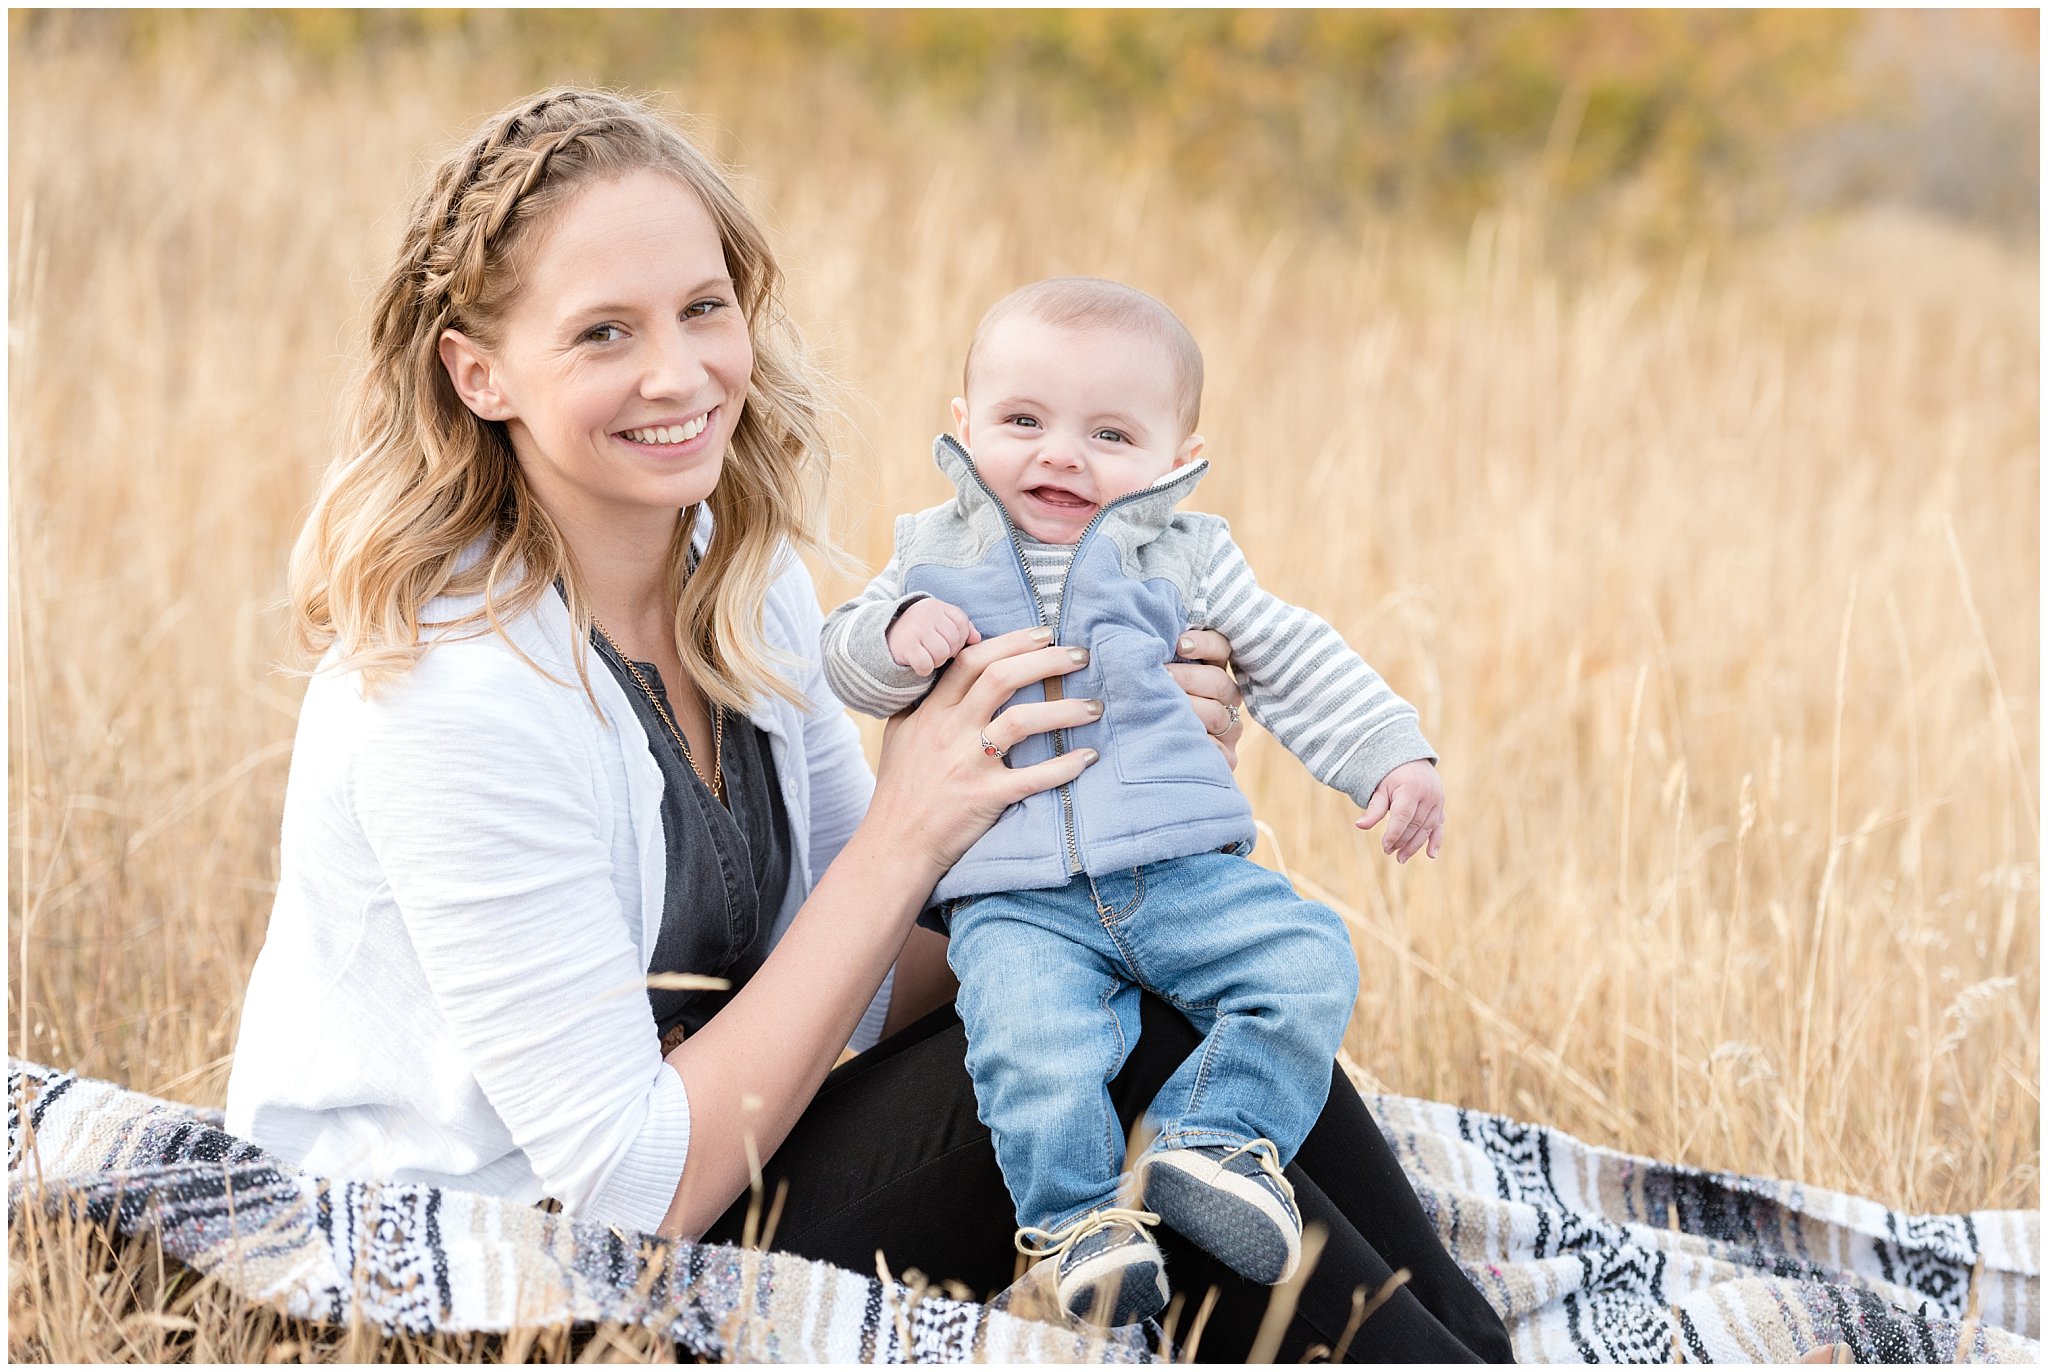 family pictures in a field | At snowbasin resort in Utah